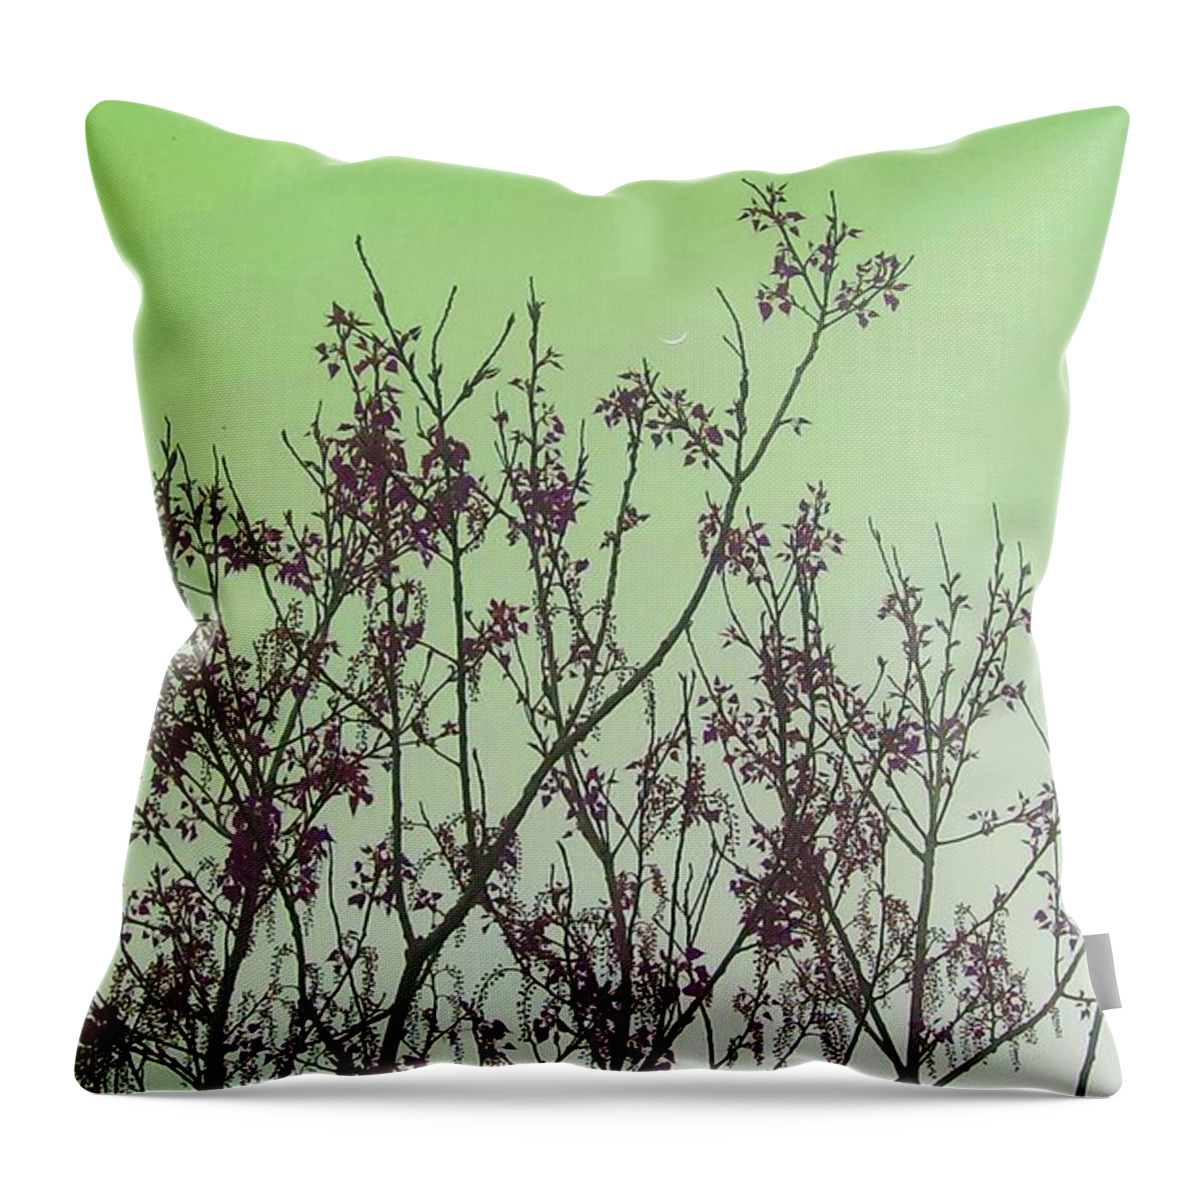 Elegant Throw Pillow featuring the photograph Spring Branches Mint by Marisela Mungia